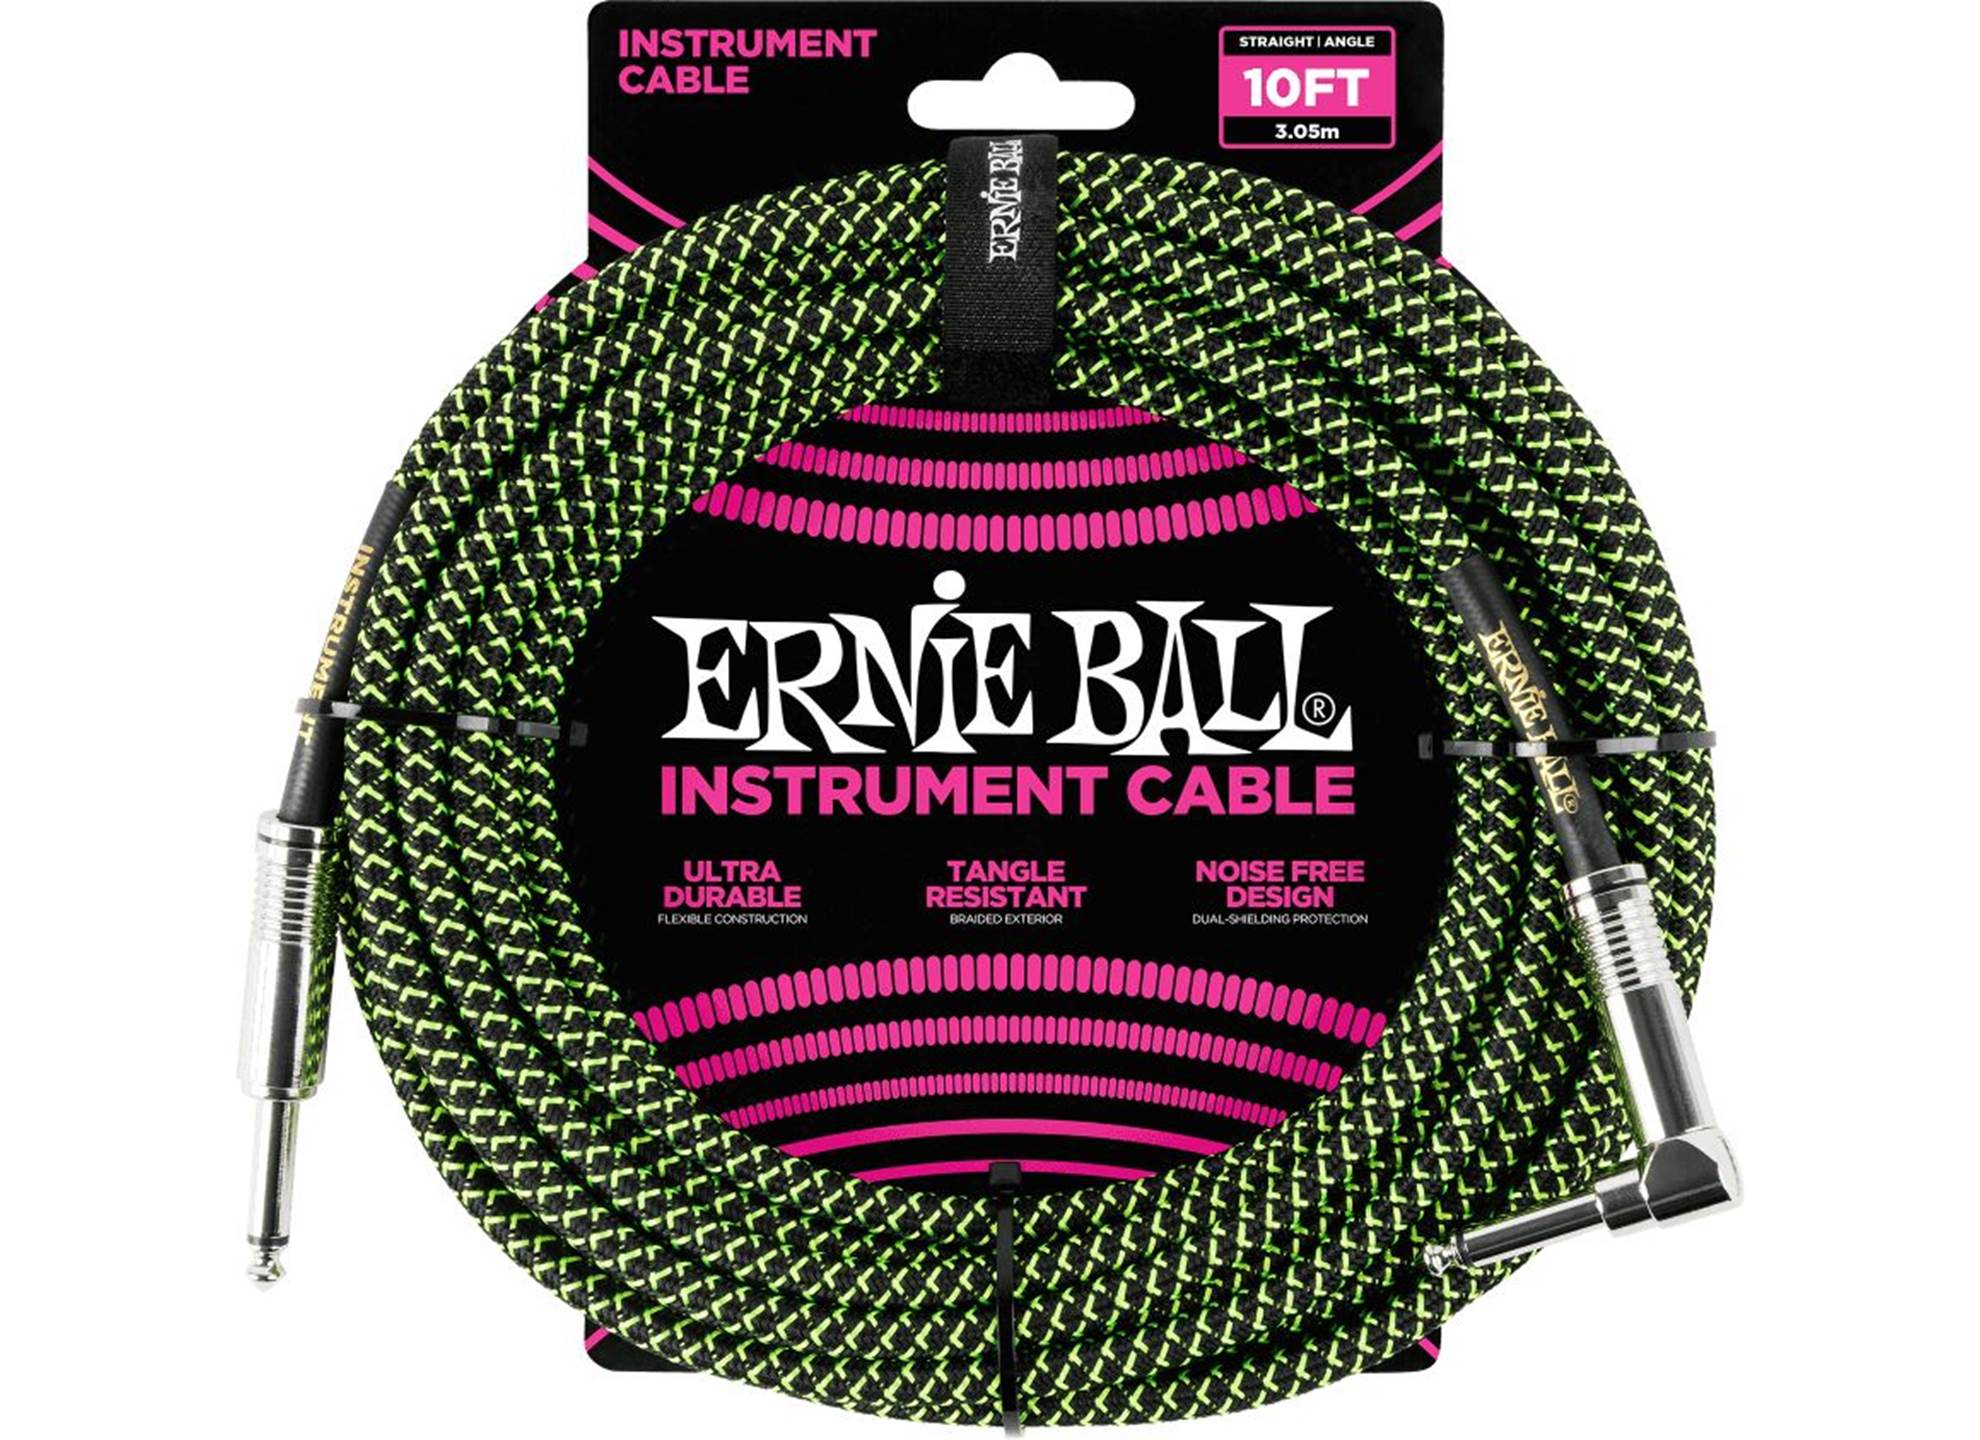 EB-6077 Instrument Cable Black & Green 3 m